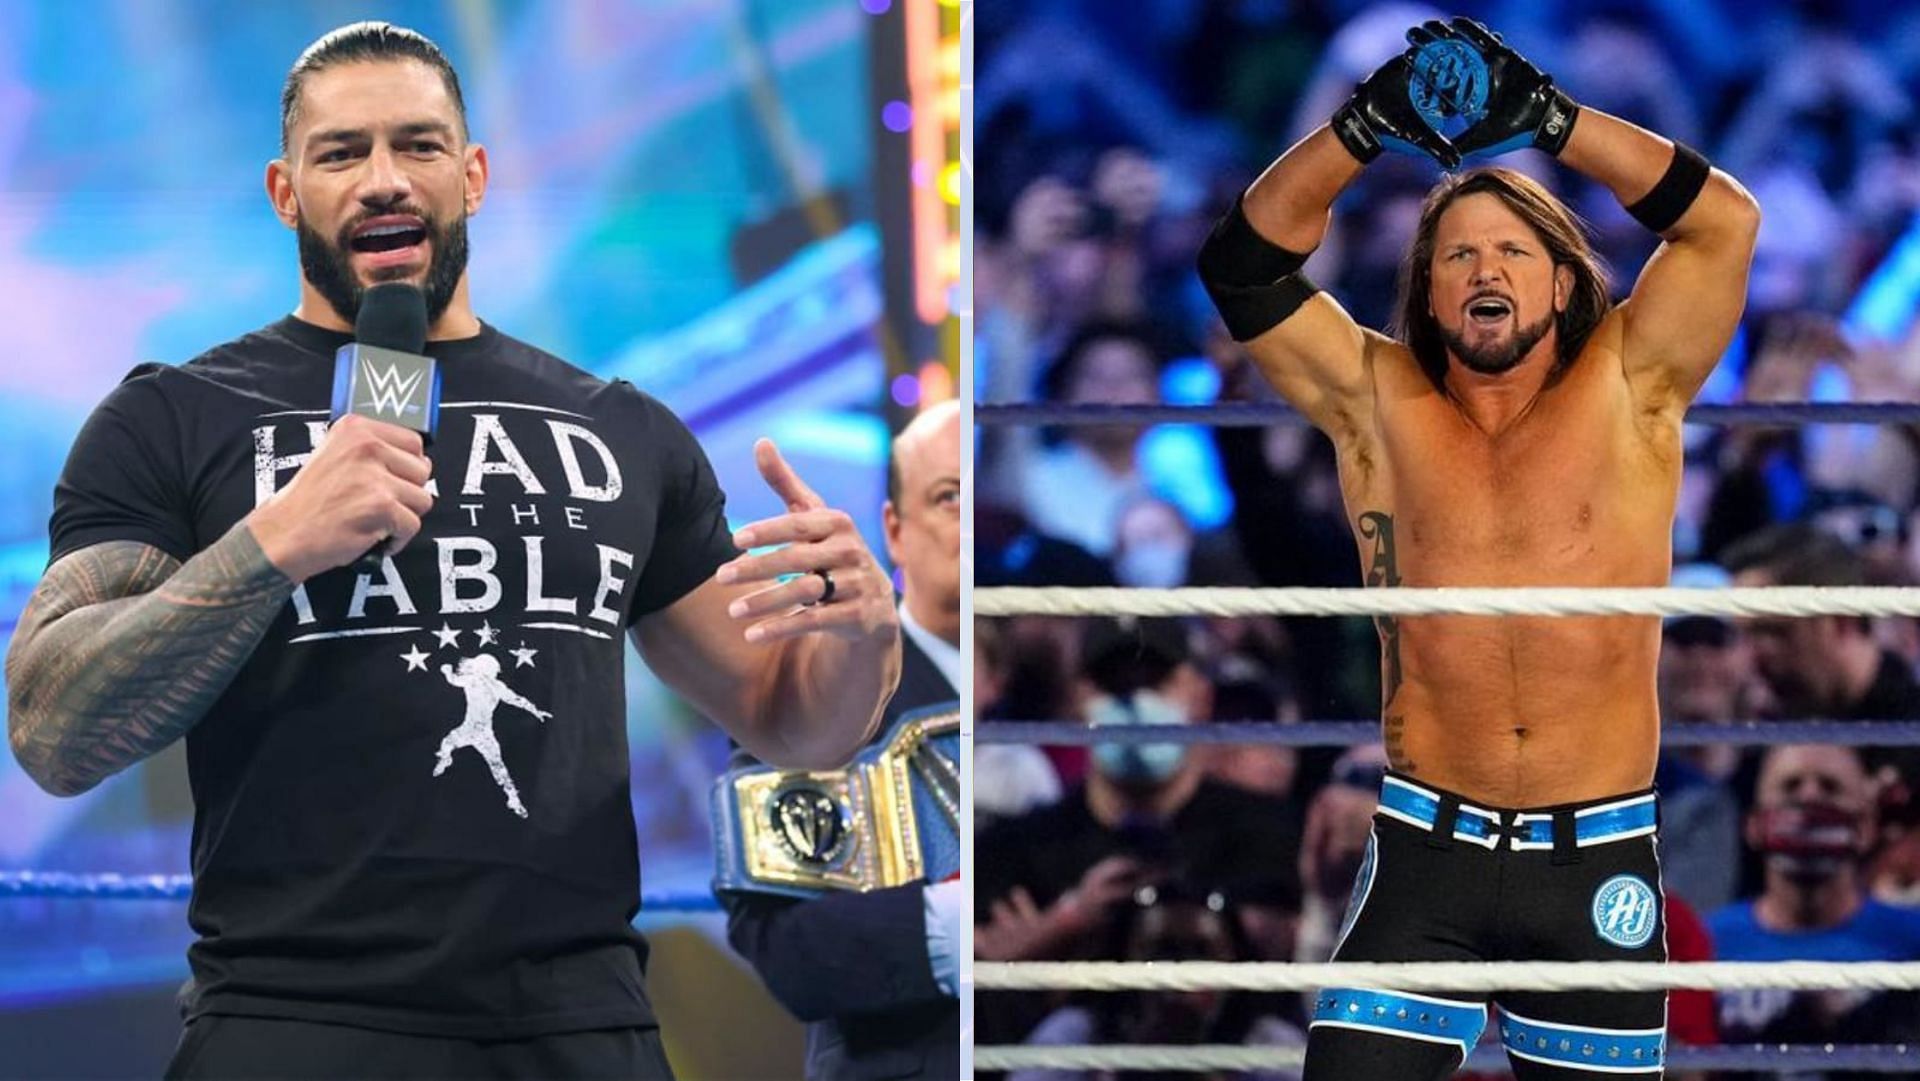 Roman Reigns and AJ Styles are set to appear on SmackDown